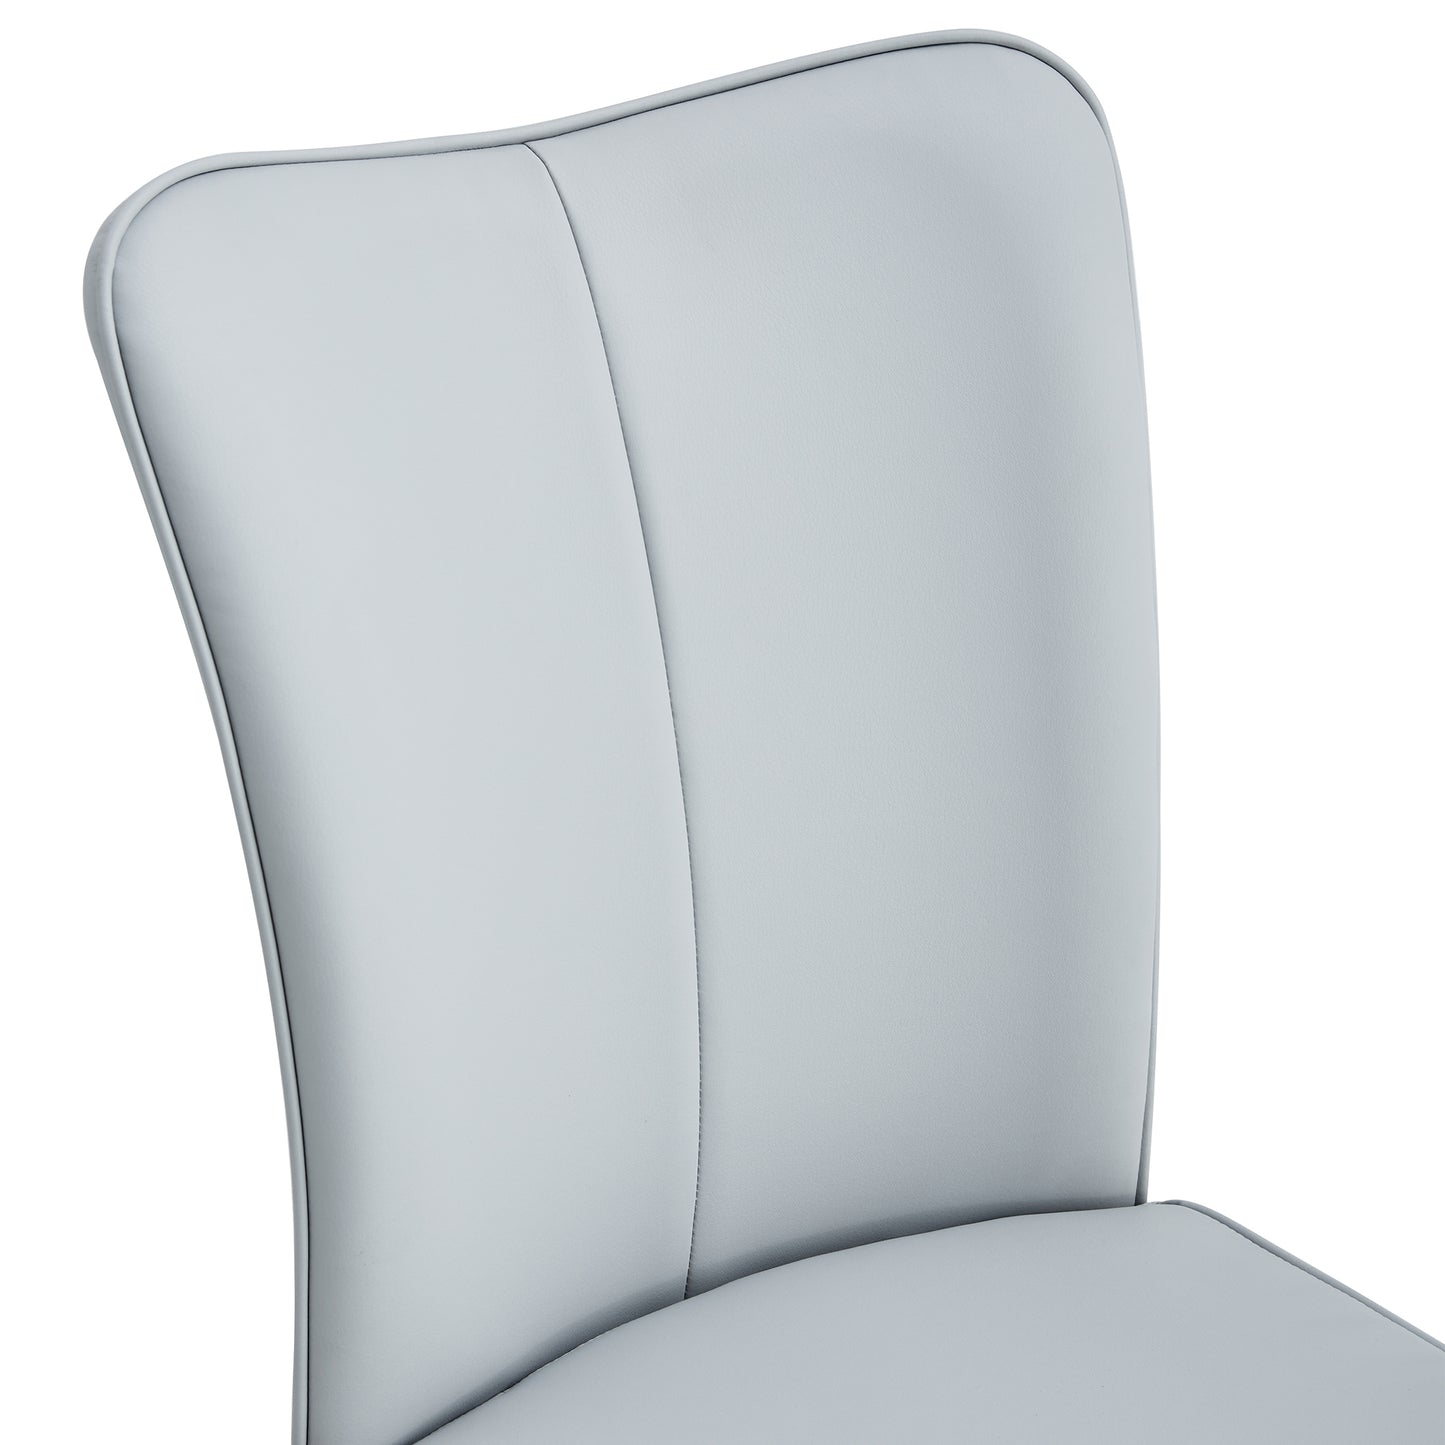 Phelps minimalist dining chairs in Light Gray. (Set of 4)